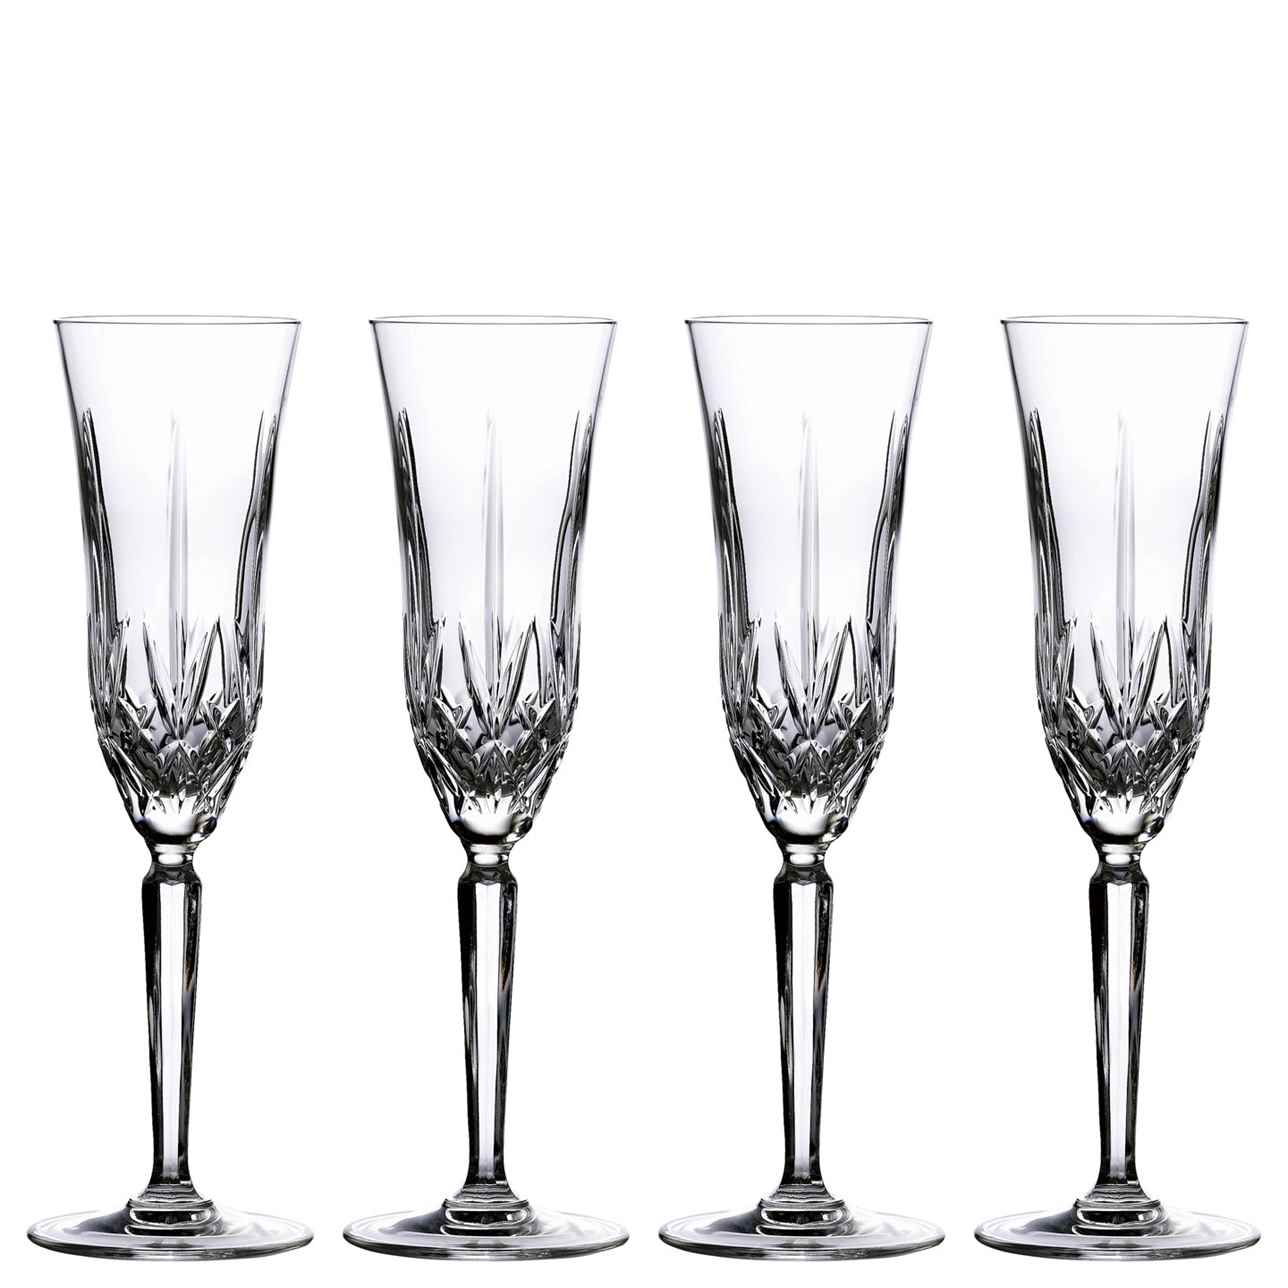  Marquis Maxwell Champagne Flute Set of 4 